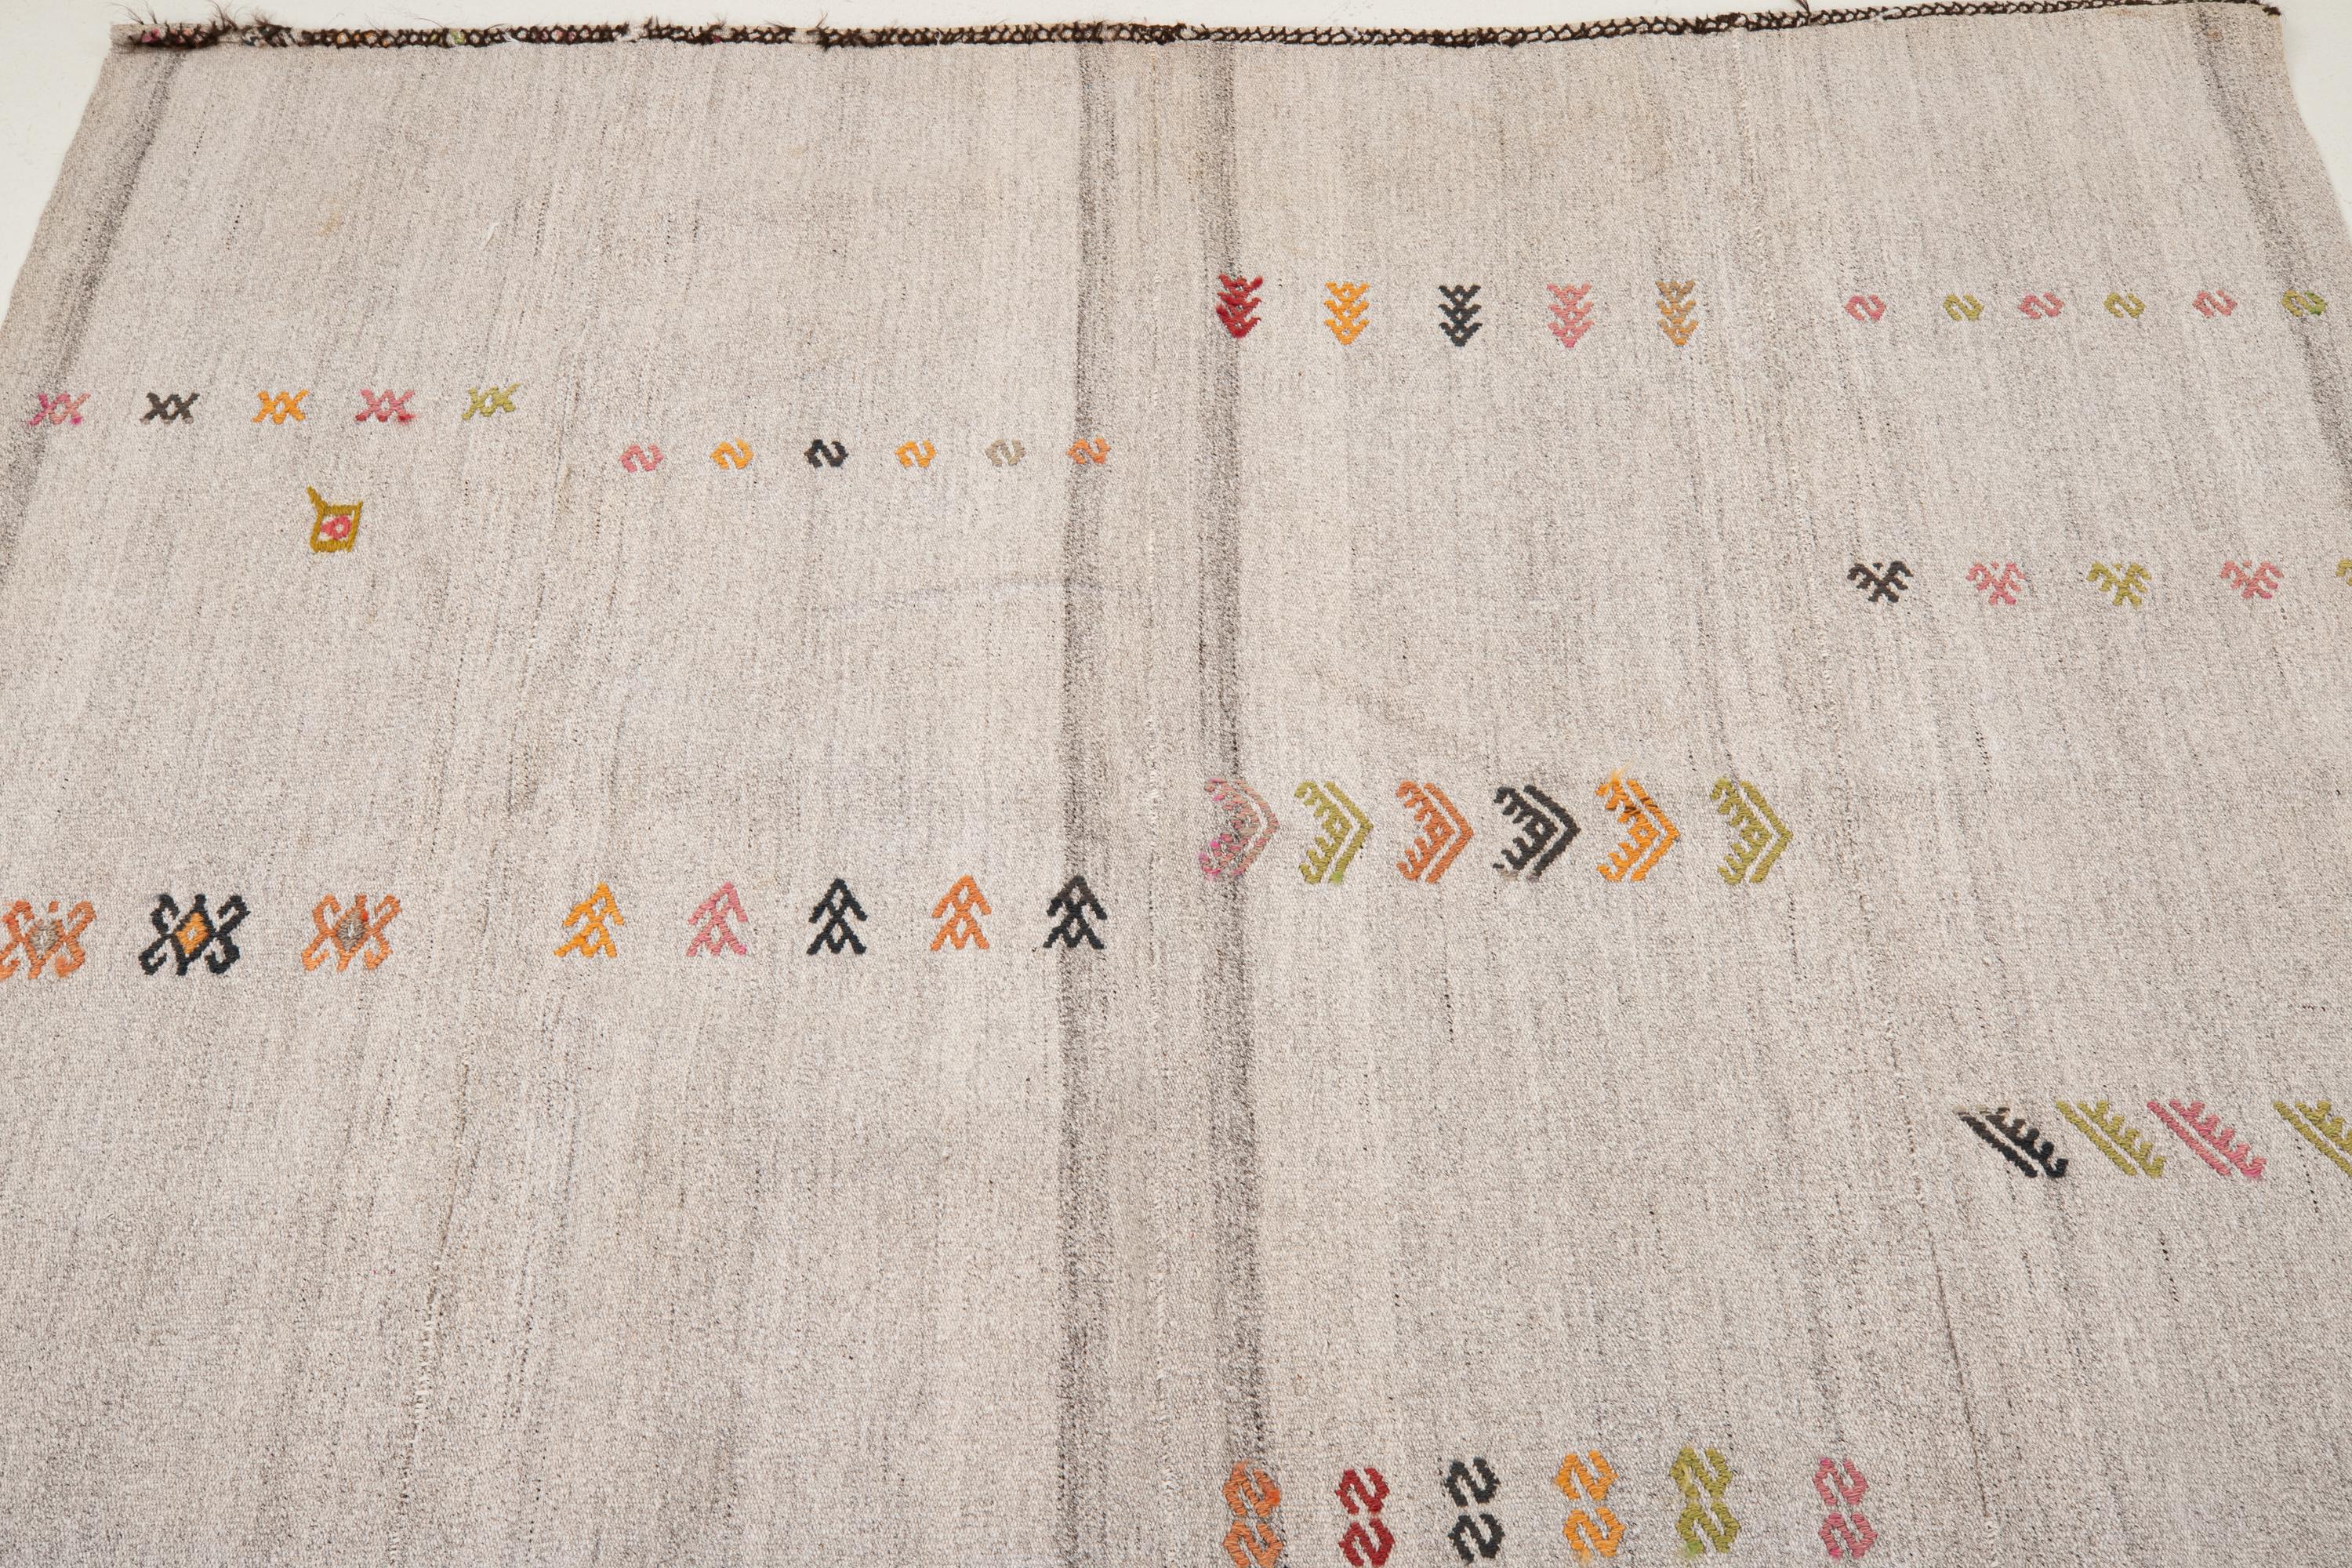 Hand-Woven Anatolian Kilim, Cotton and Goat Hair Mix, 1960s For Sale